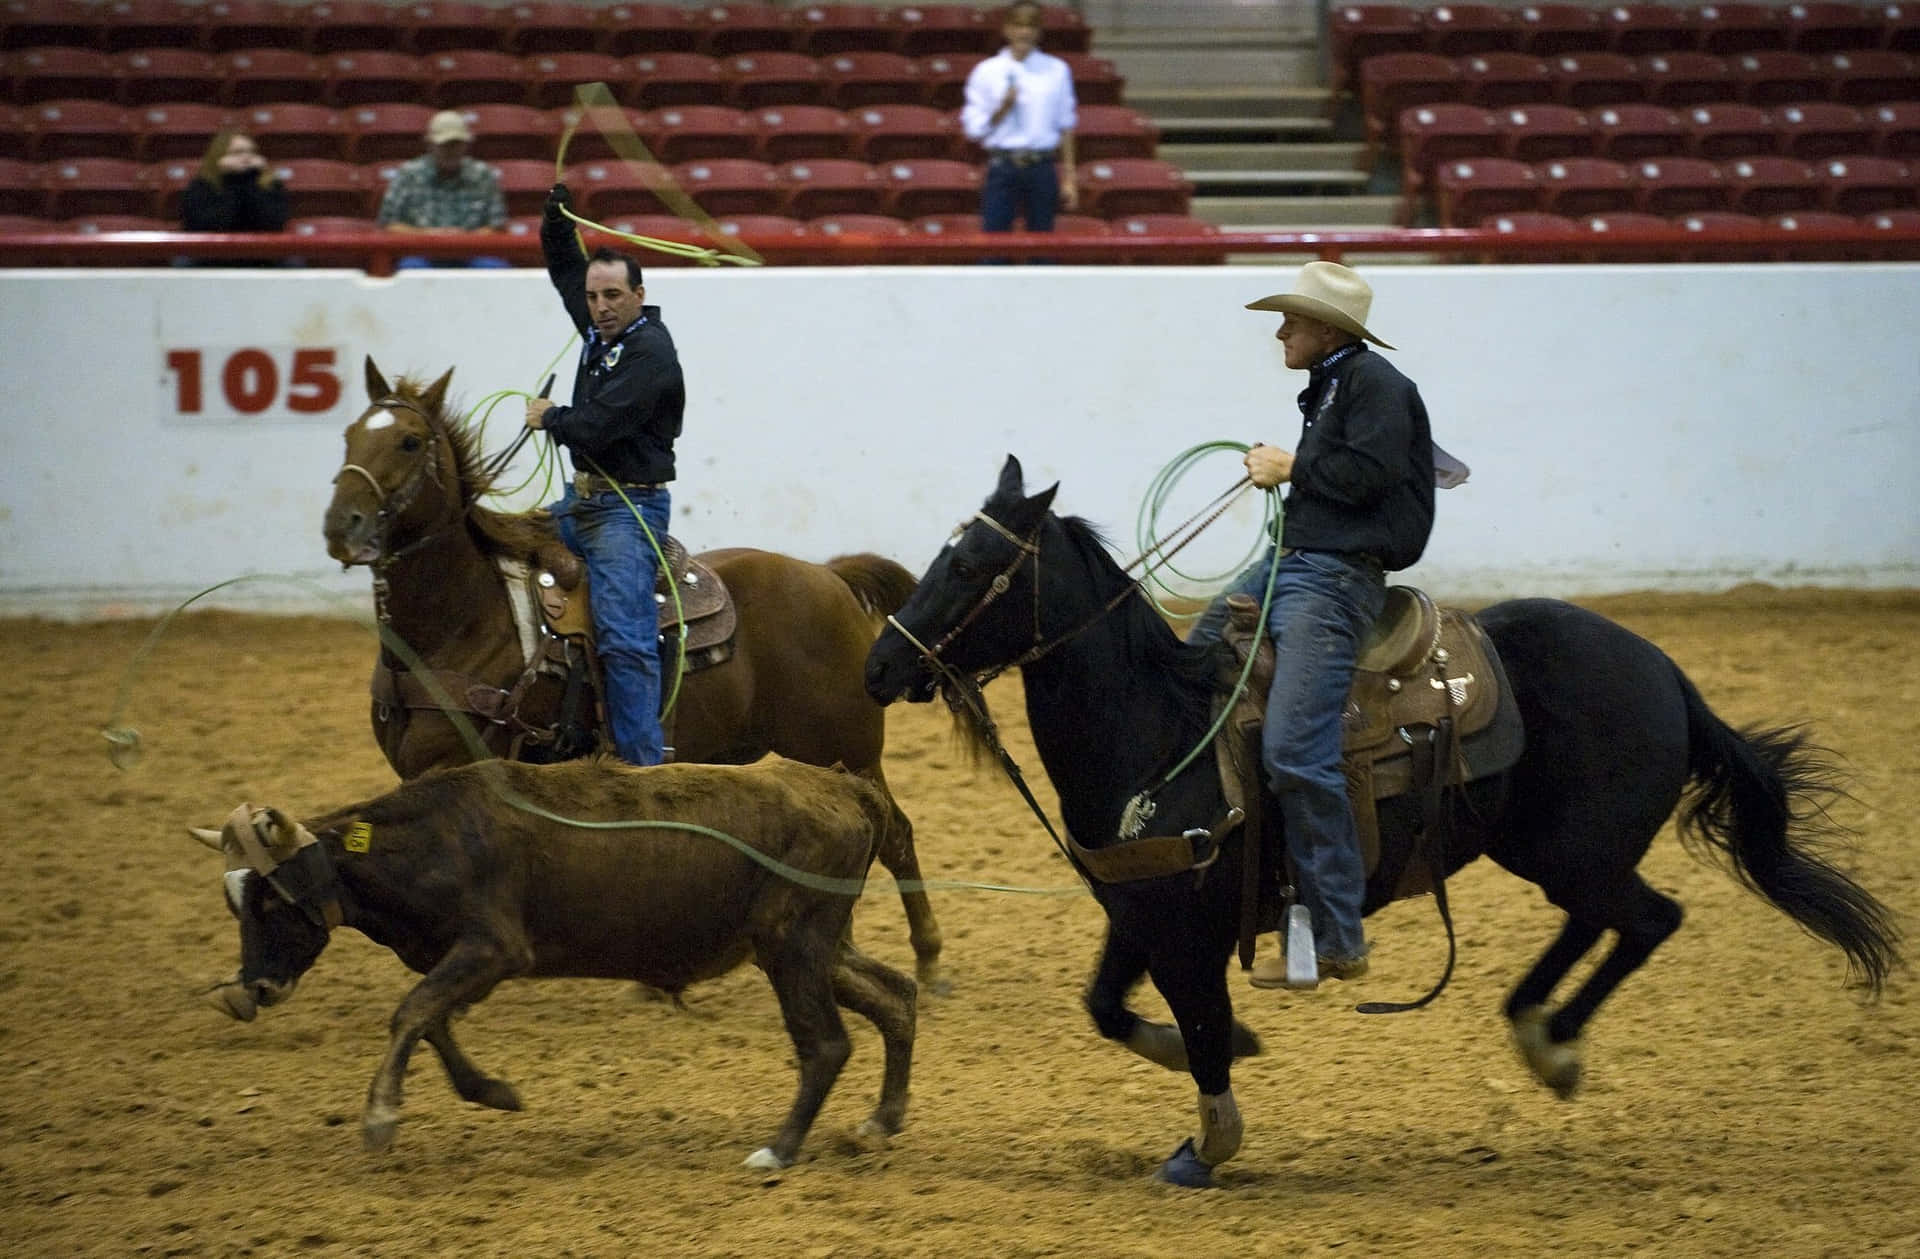 A Cowboy takes aim in a roping competition